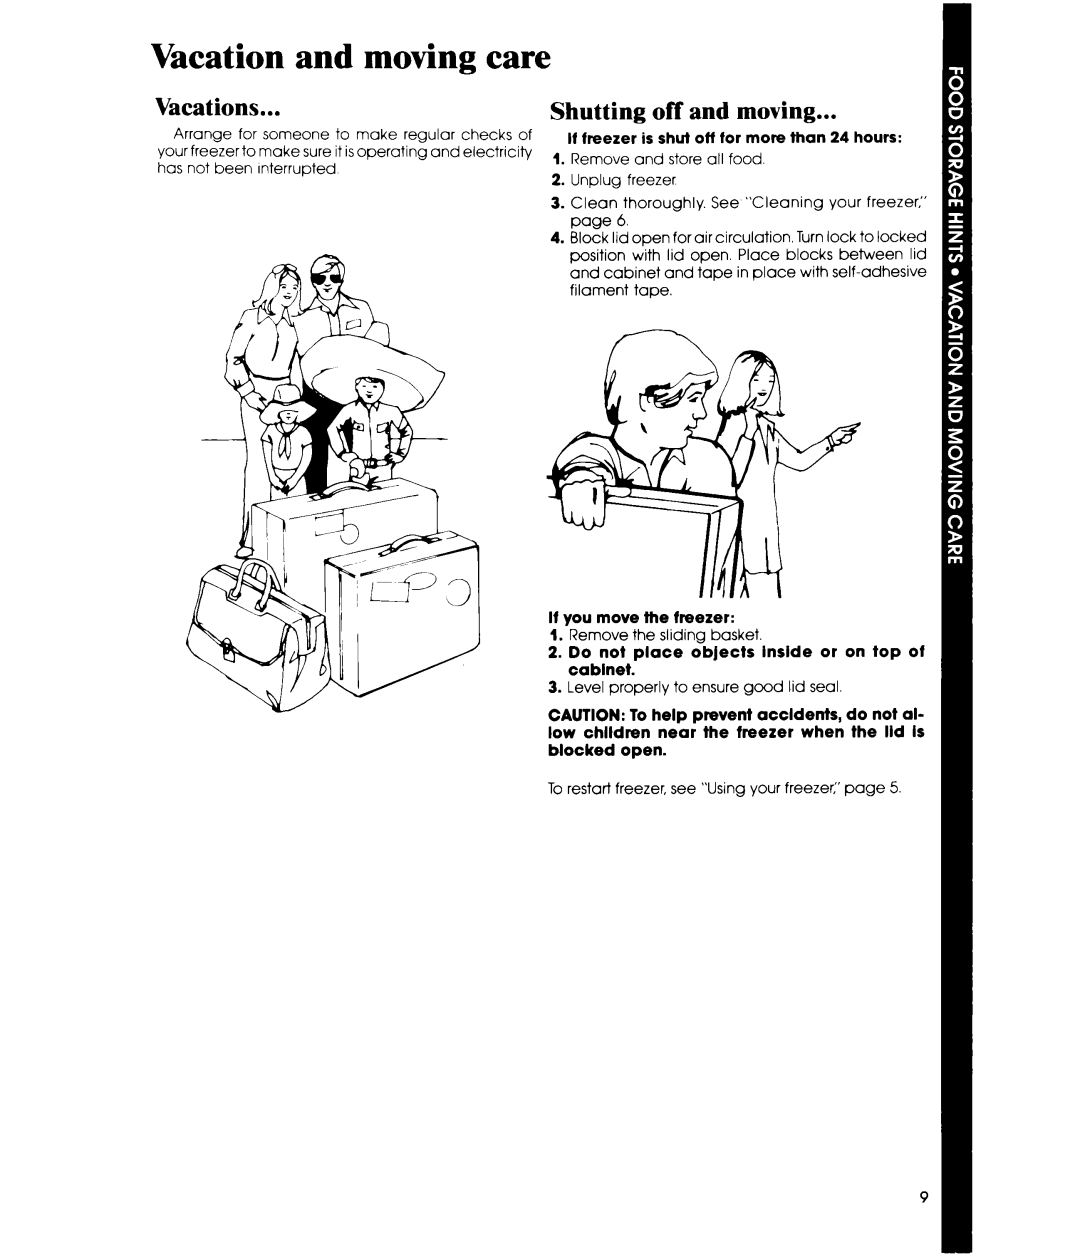 Whirlpool EH090F, EH060F manual Vacation and moving care, Vacations, Shutting off and moving, If you move the freezer 